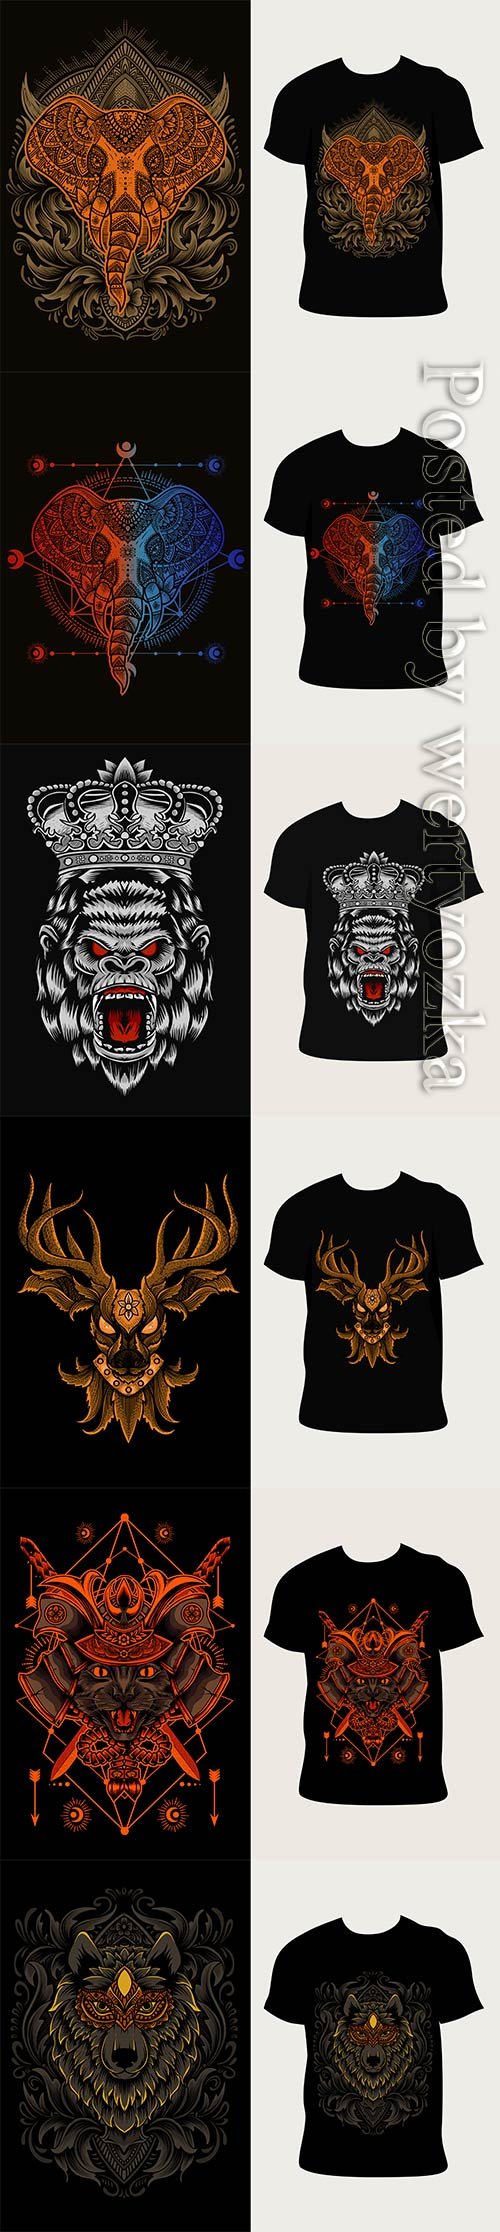 Vector illustration with t-shirt design